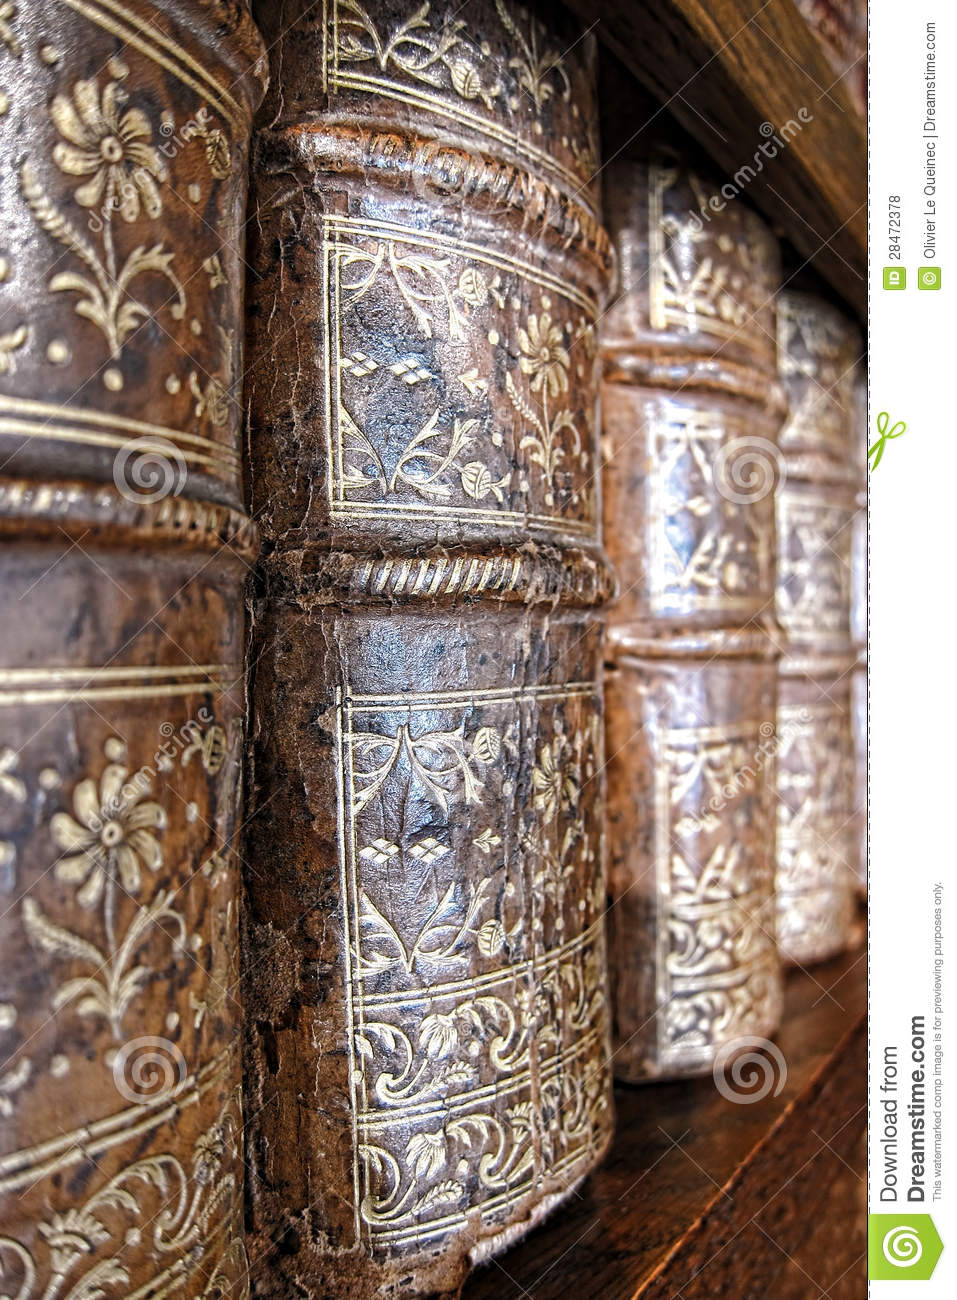 Old Leather Bound Books Spines On Library Shelf Royalty Free Stock